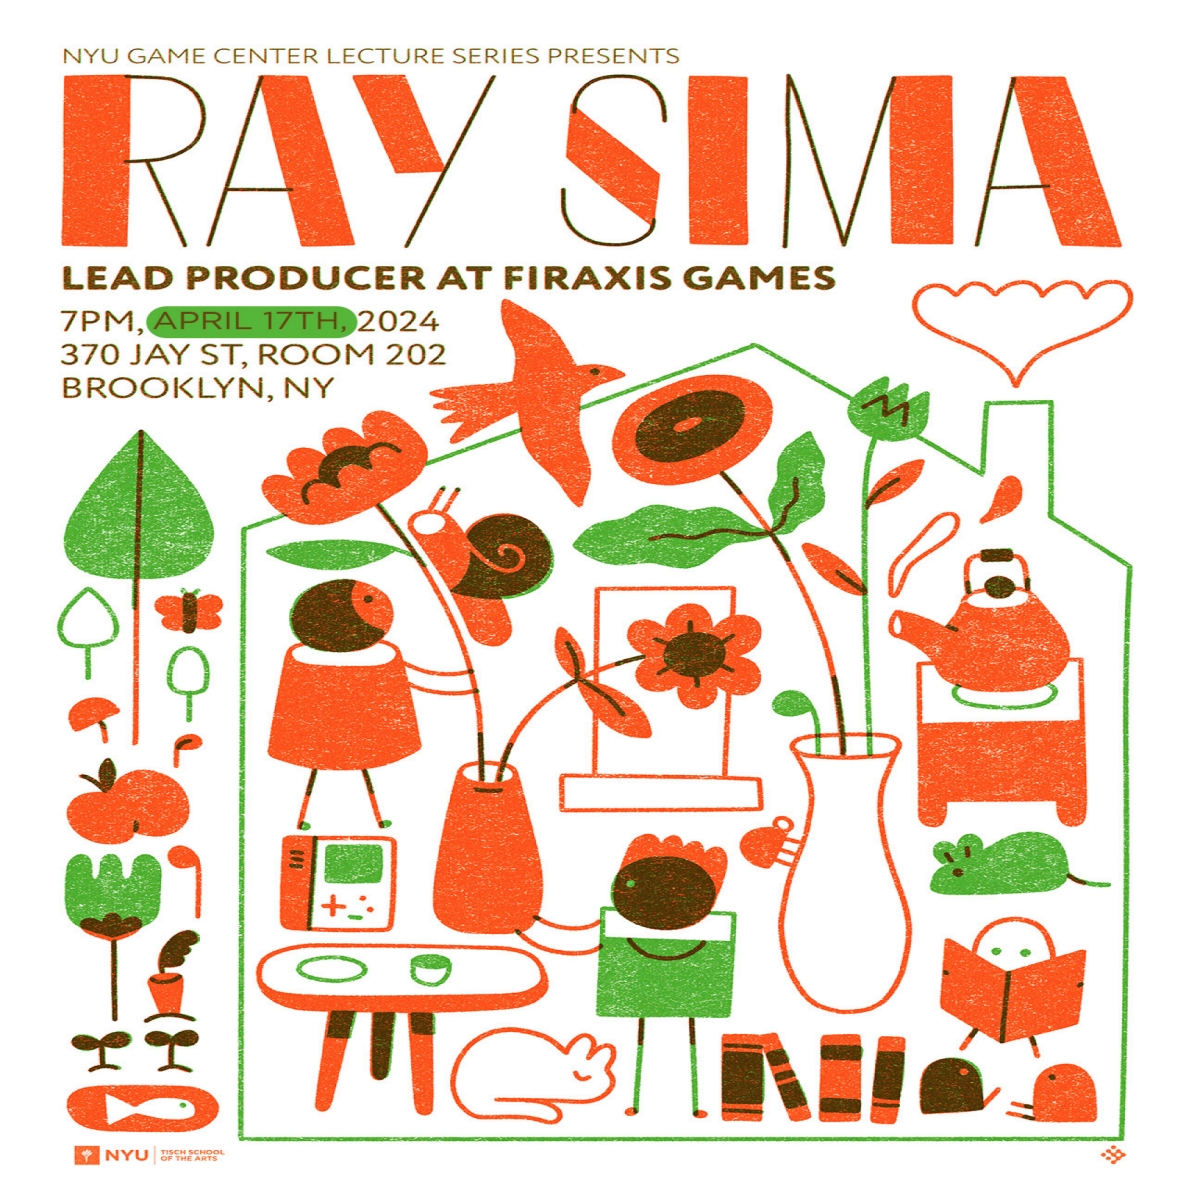 Poster advertising Ray Sima's lecture series visit, illustrated by Arlin Ortiz